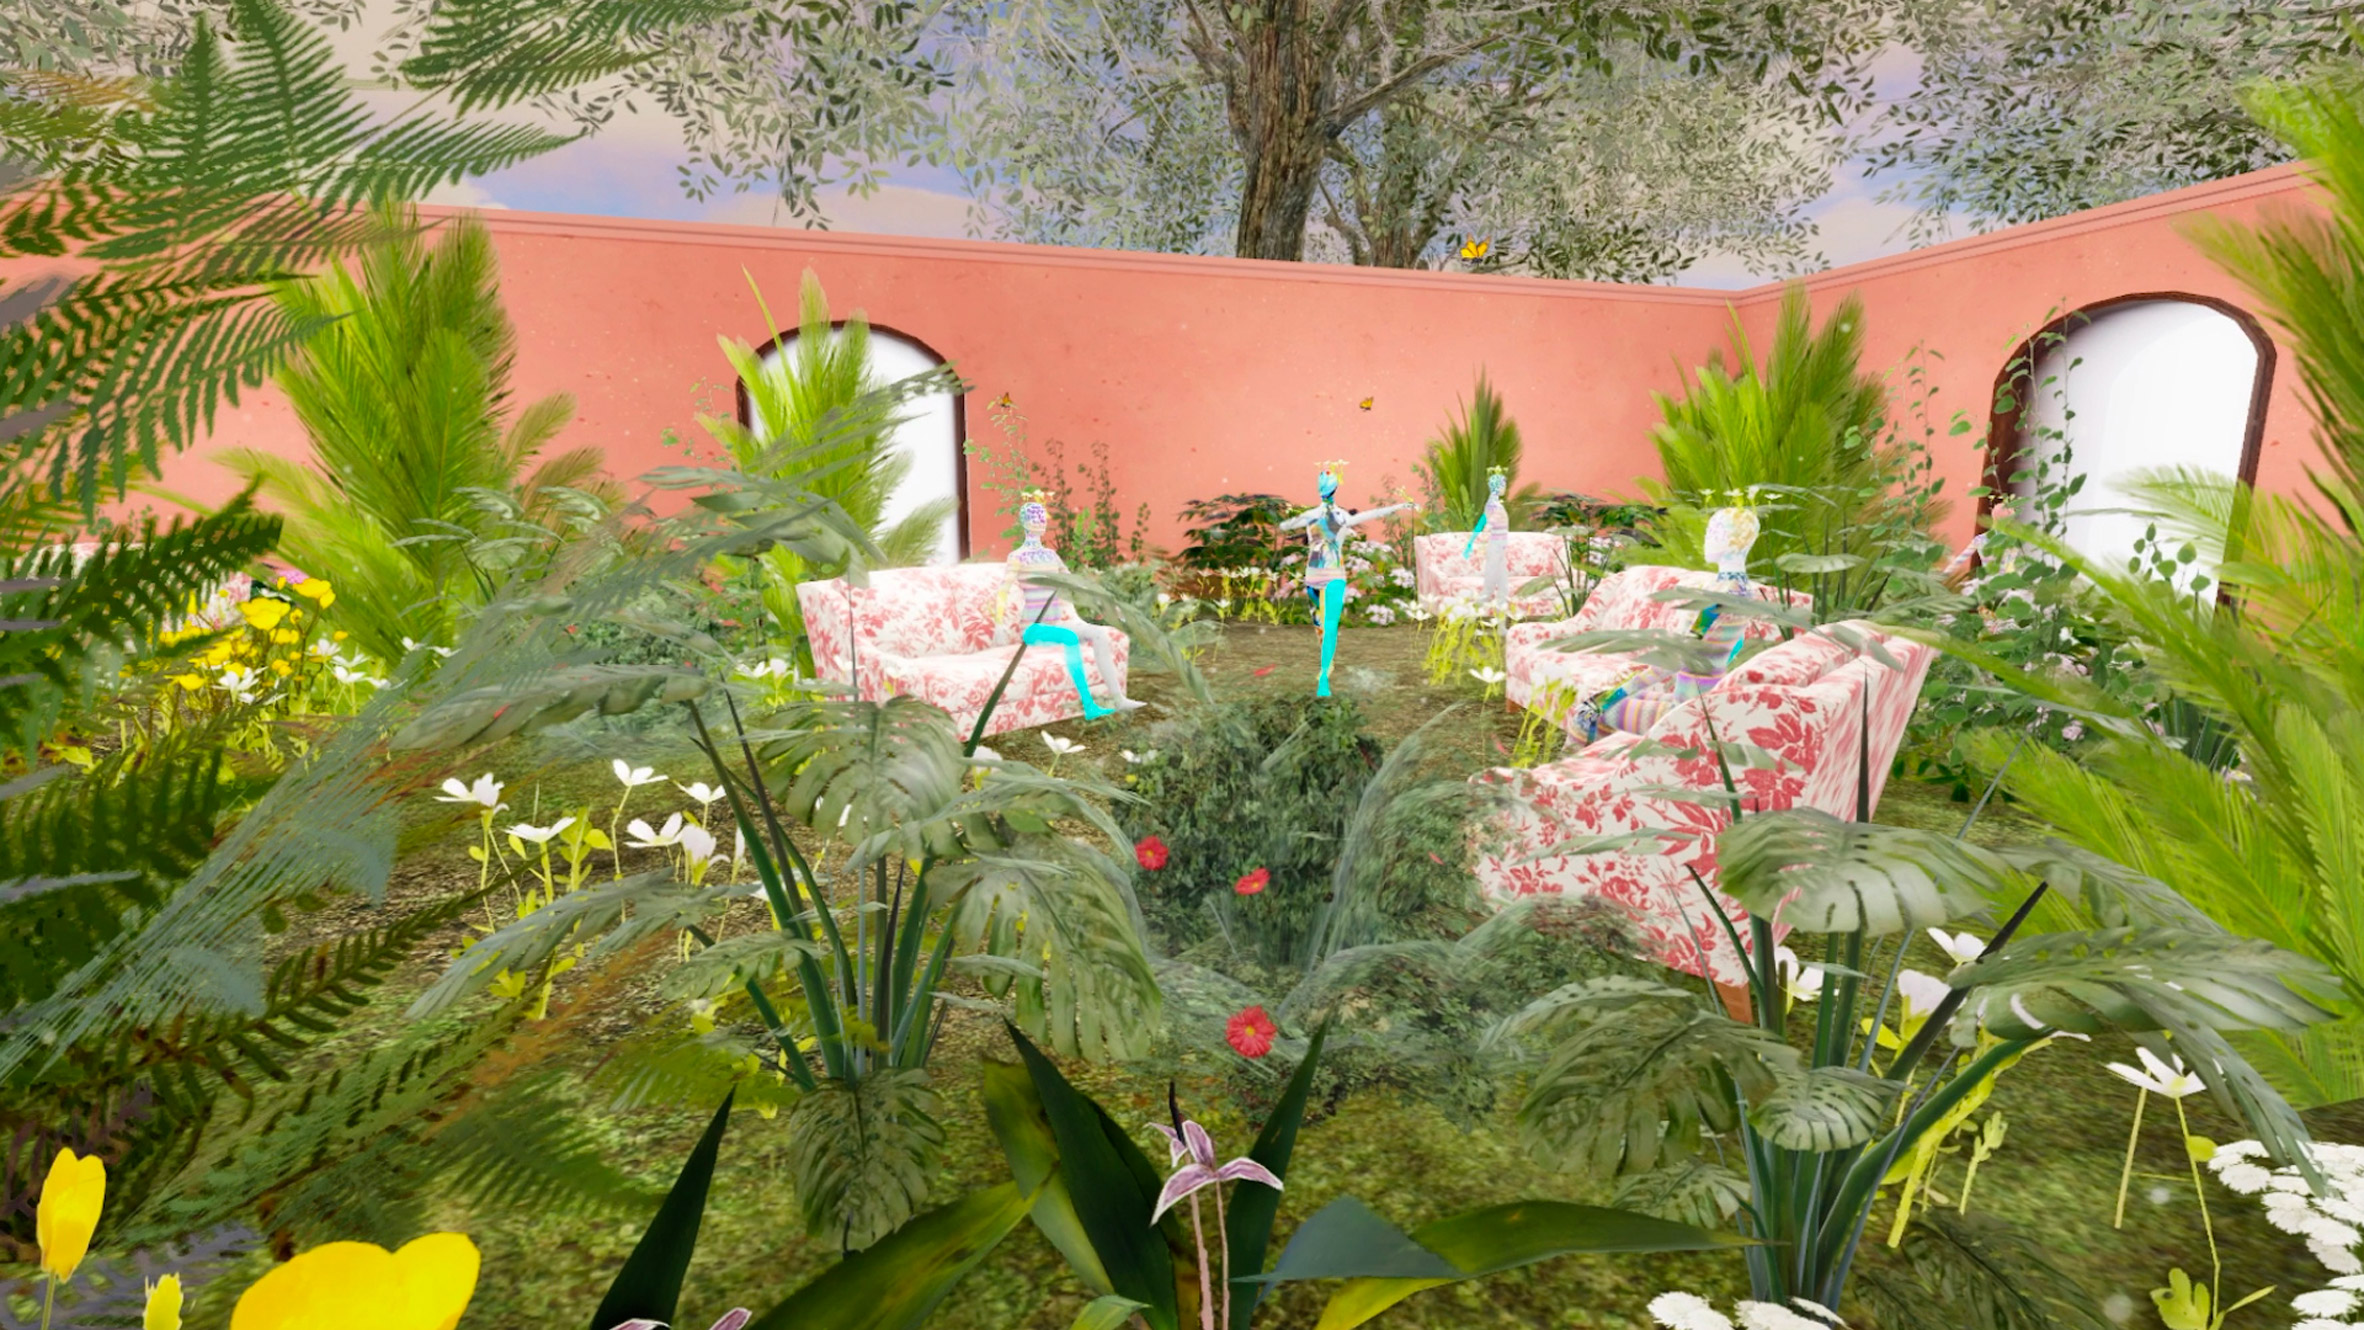 Gucci hosts virtual garden in online game Roblox to mark its centenary